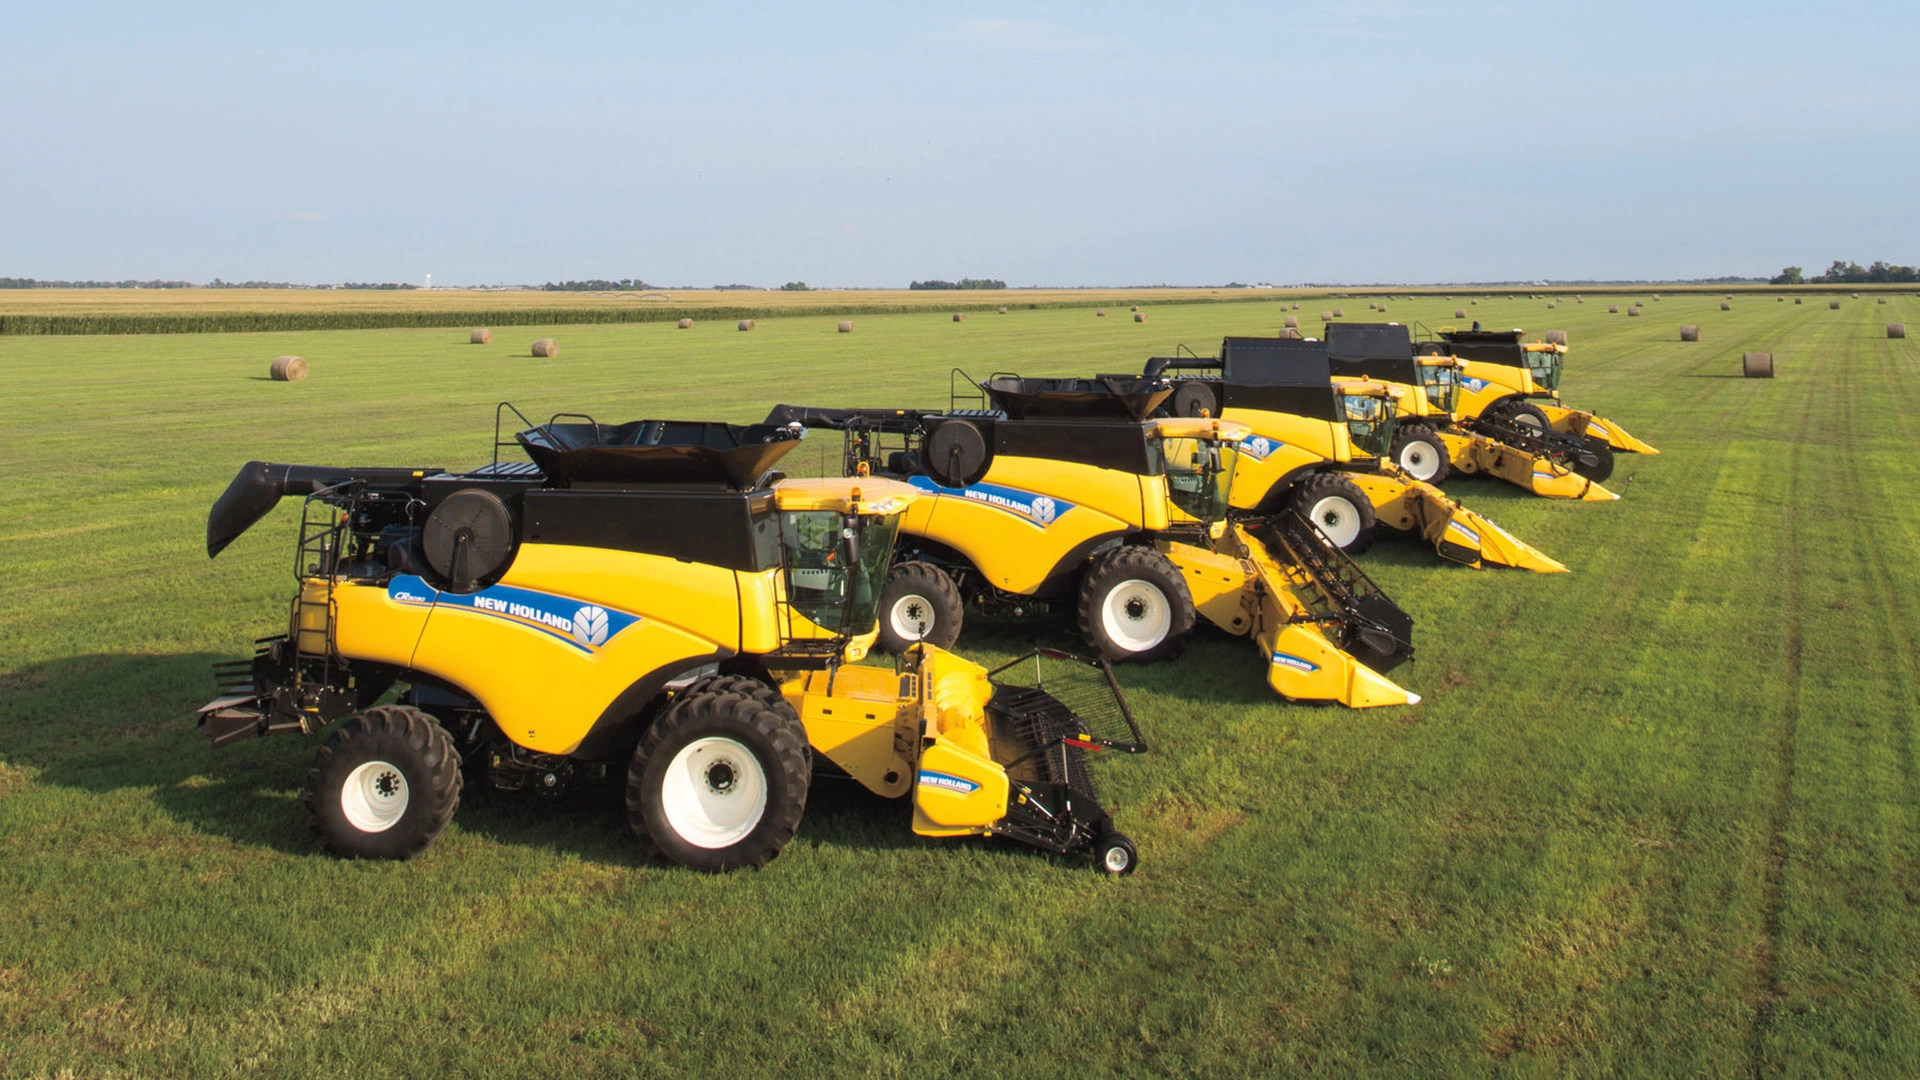 Fleet of New Holland combines with Advanced Pick-Up Corn Header, enhancing productivity on the agricultural field